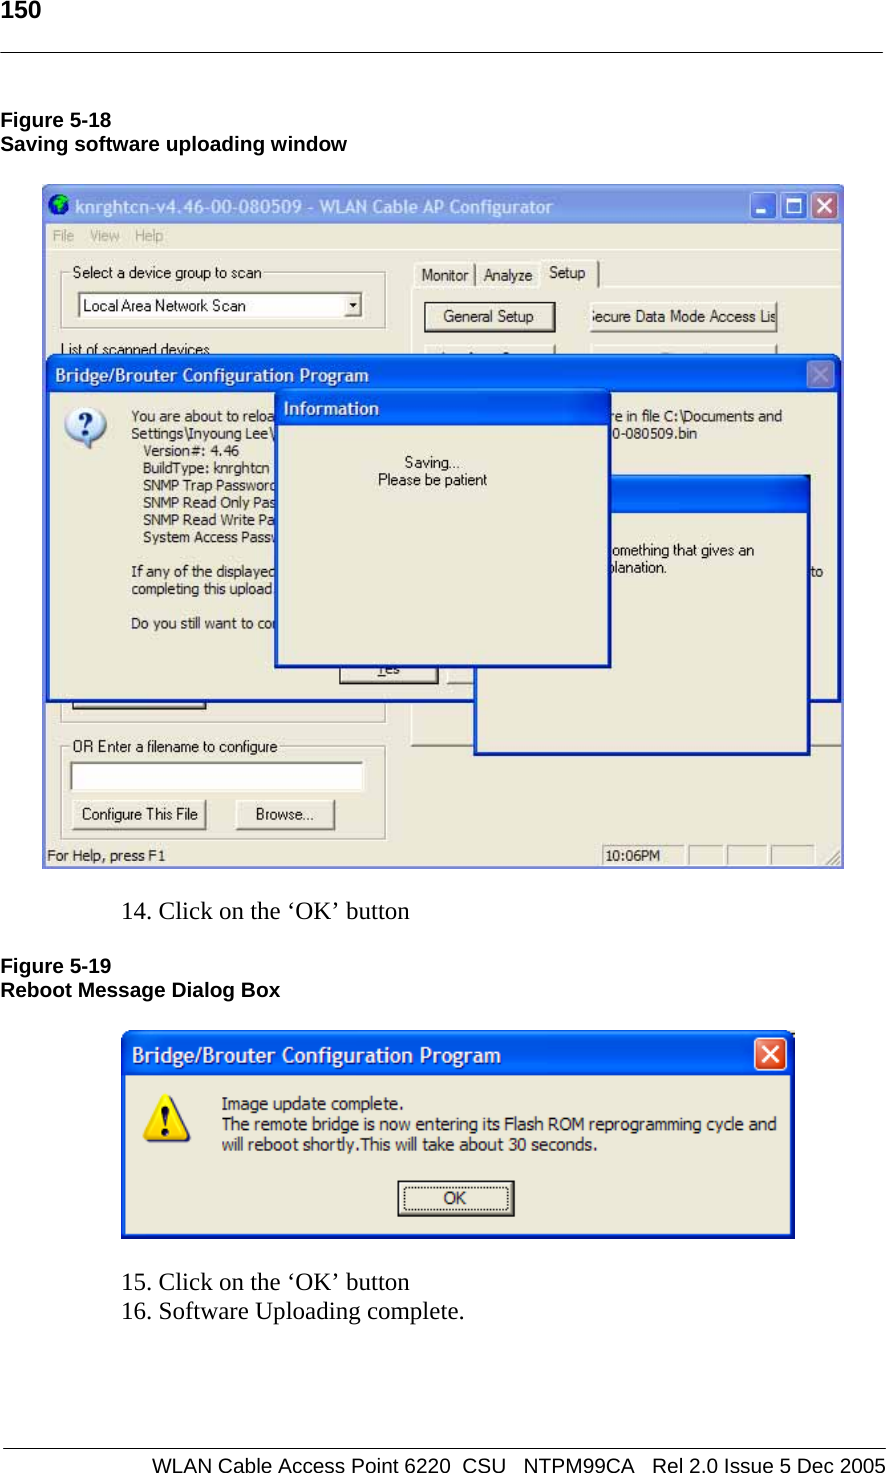   150    WLAN Cable Access Point 6220  CSU   NTPM99CA   Rel 2.0 Issue 5 Dec 2005 Figure 5-18 Saving software uploading window    14. Click on the ‘OK’ button  Figure 5-19 Reboot Message Dialog Box    15. Click on the ‘OK’ button 16. Software Uploading complete.     